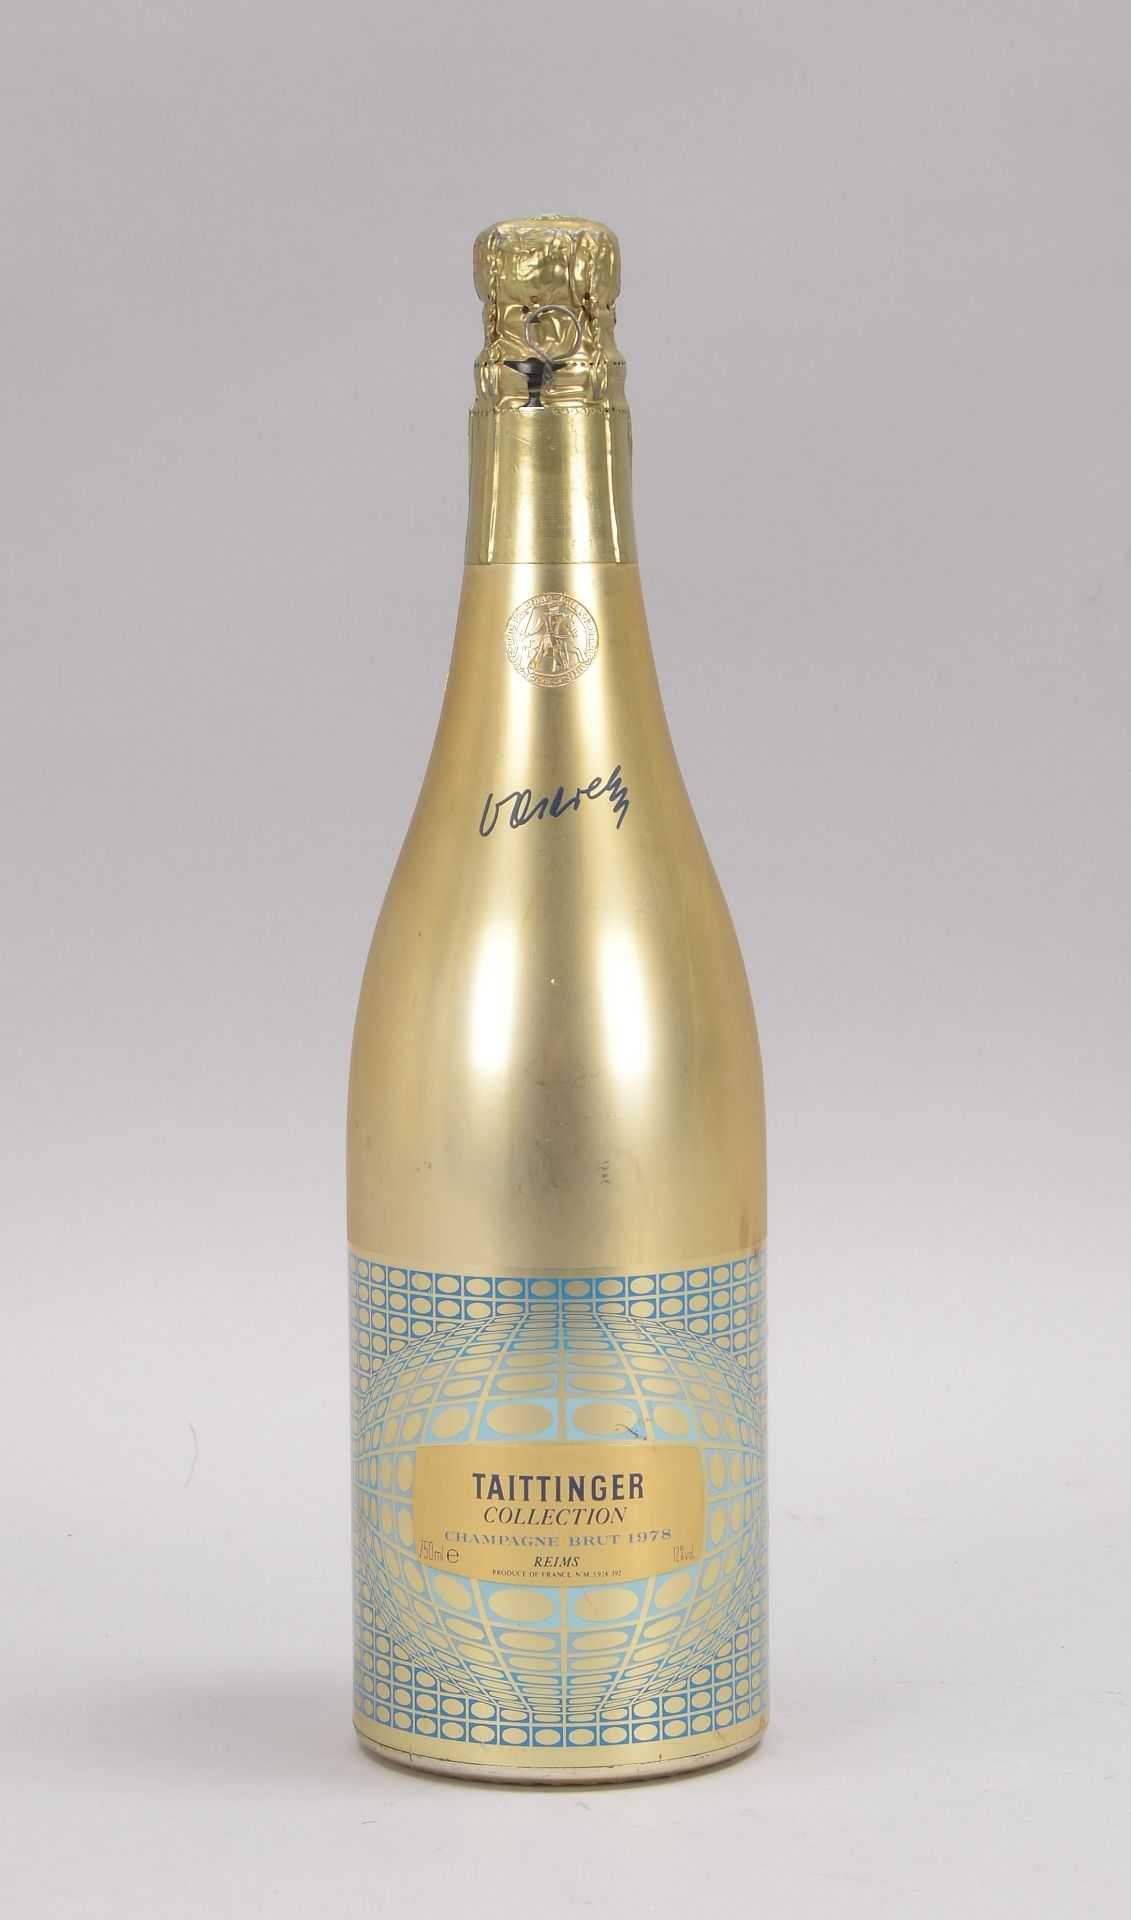 Taittinger Collection (Reims) - Victor Vasarely, 1978, Champagne Brut, 0,75 l